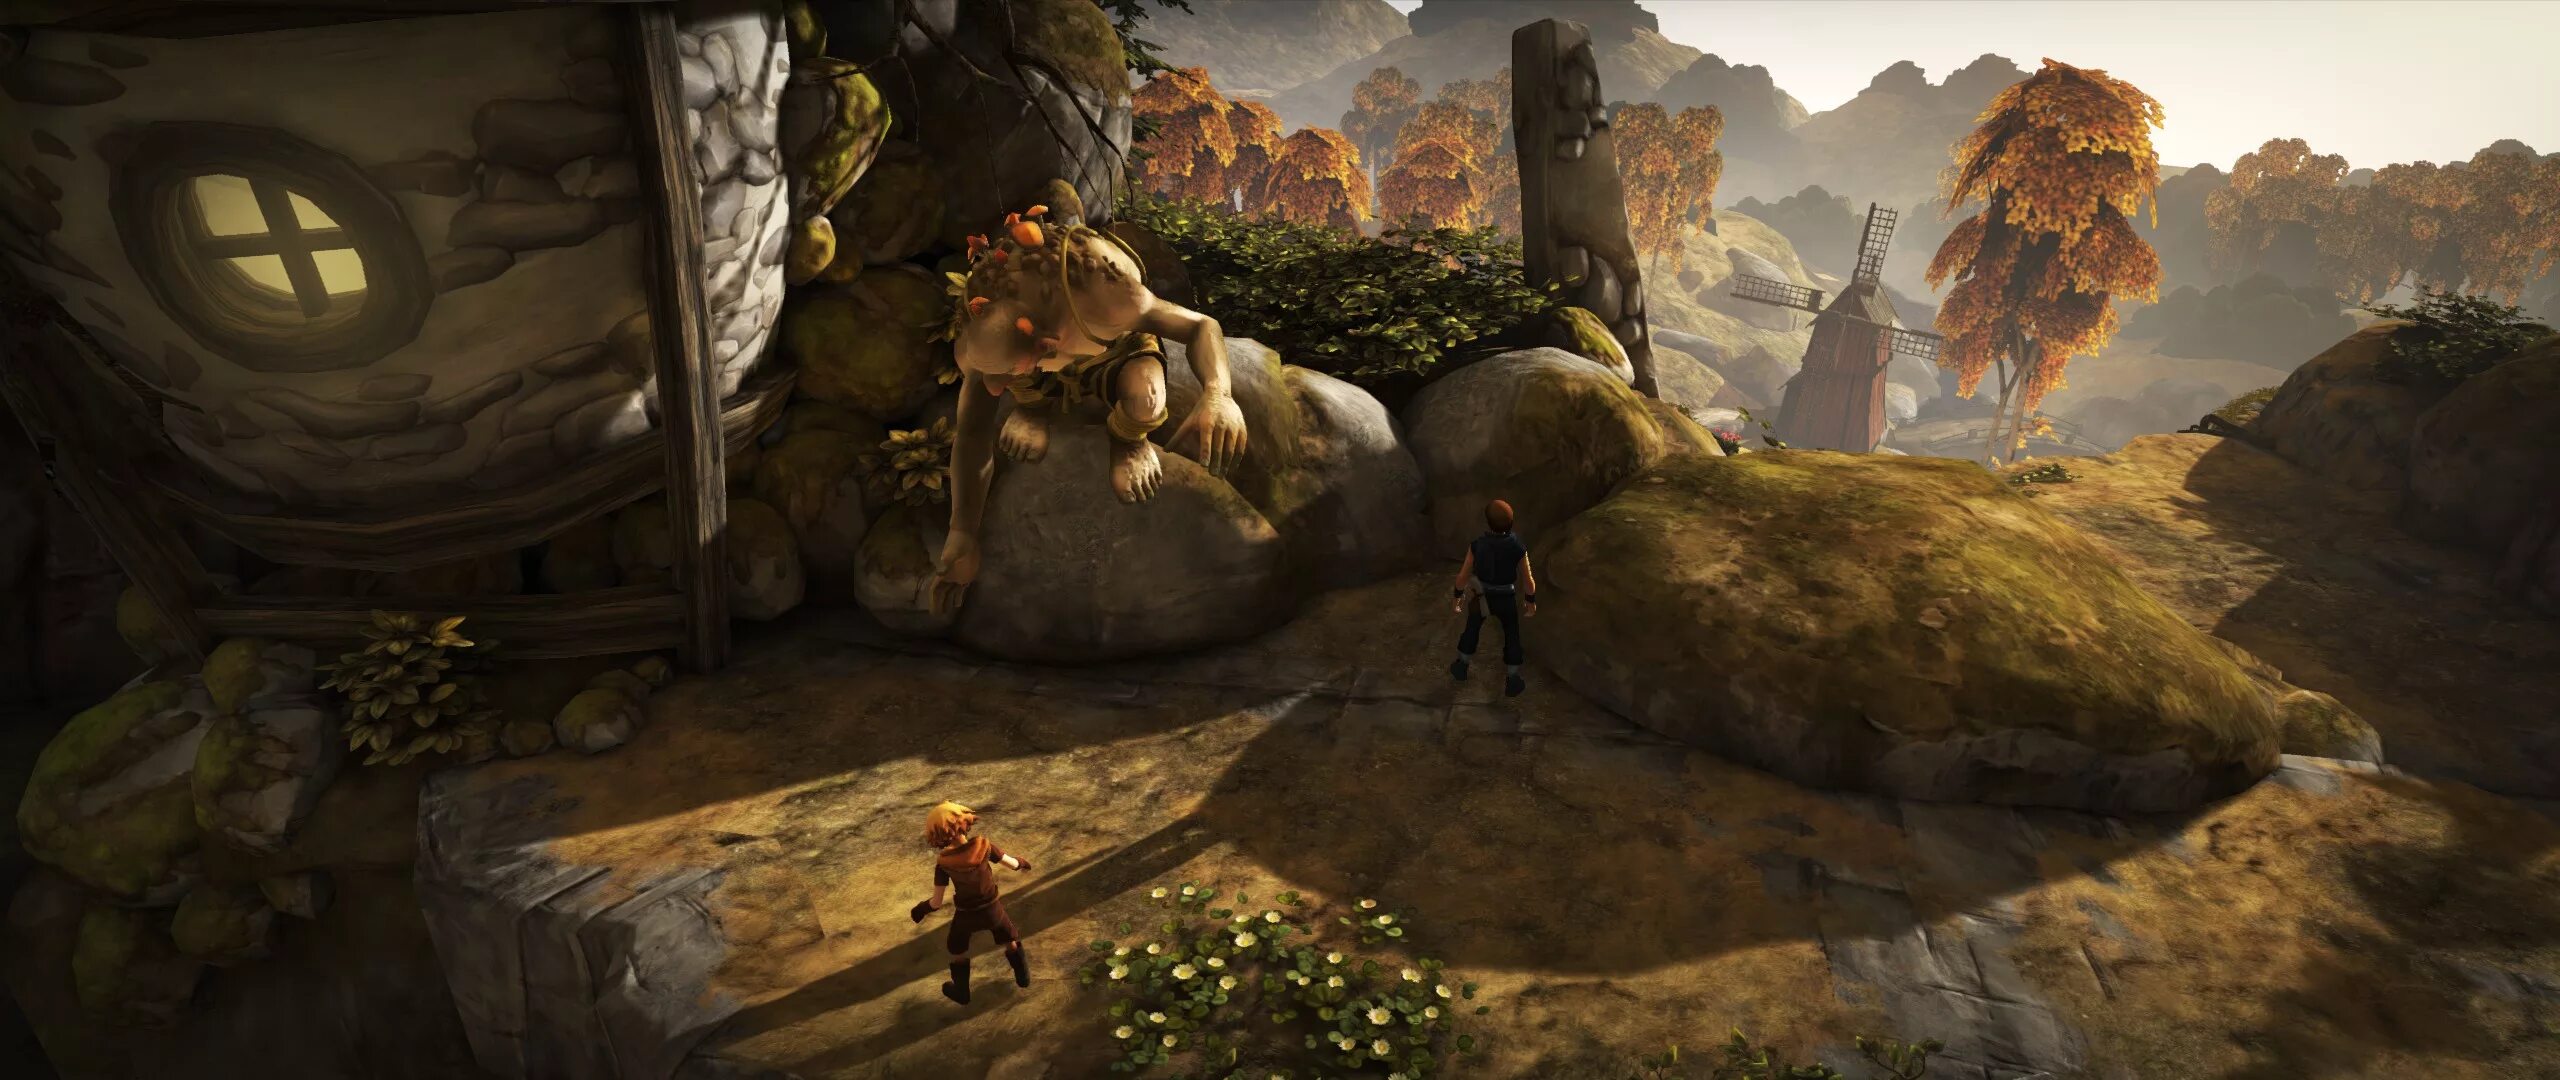 Brothers tale of two sons remake ps5. Brothers: a Tale of two sons. Brothers a Tale of two sons арт. Brothers: a Tale of two sons Remake. Brothers a Tale of two sons арты.